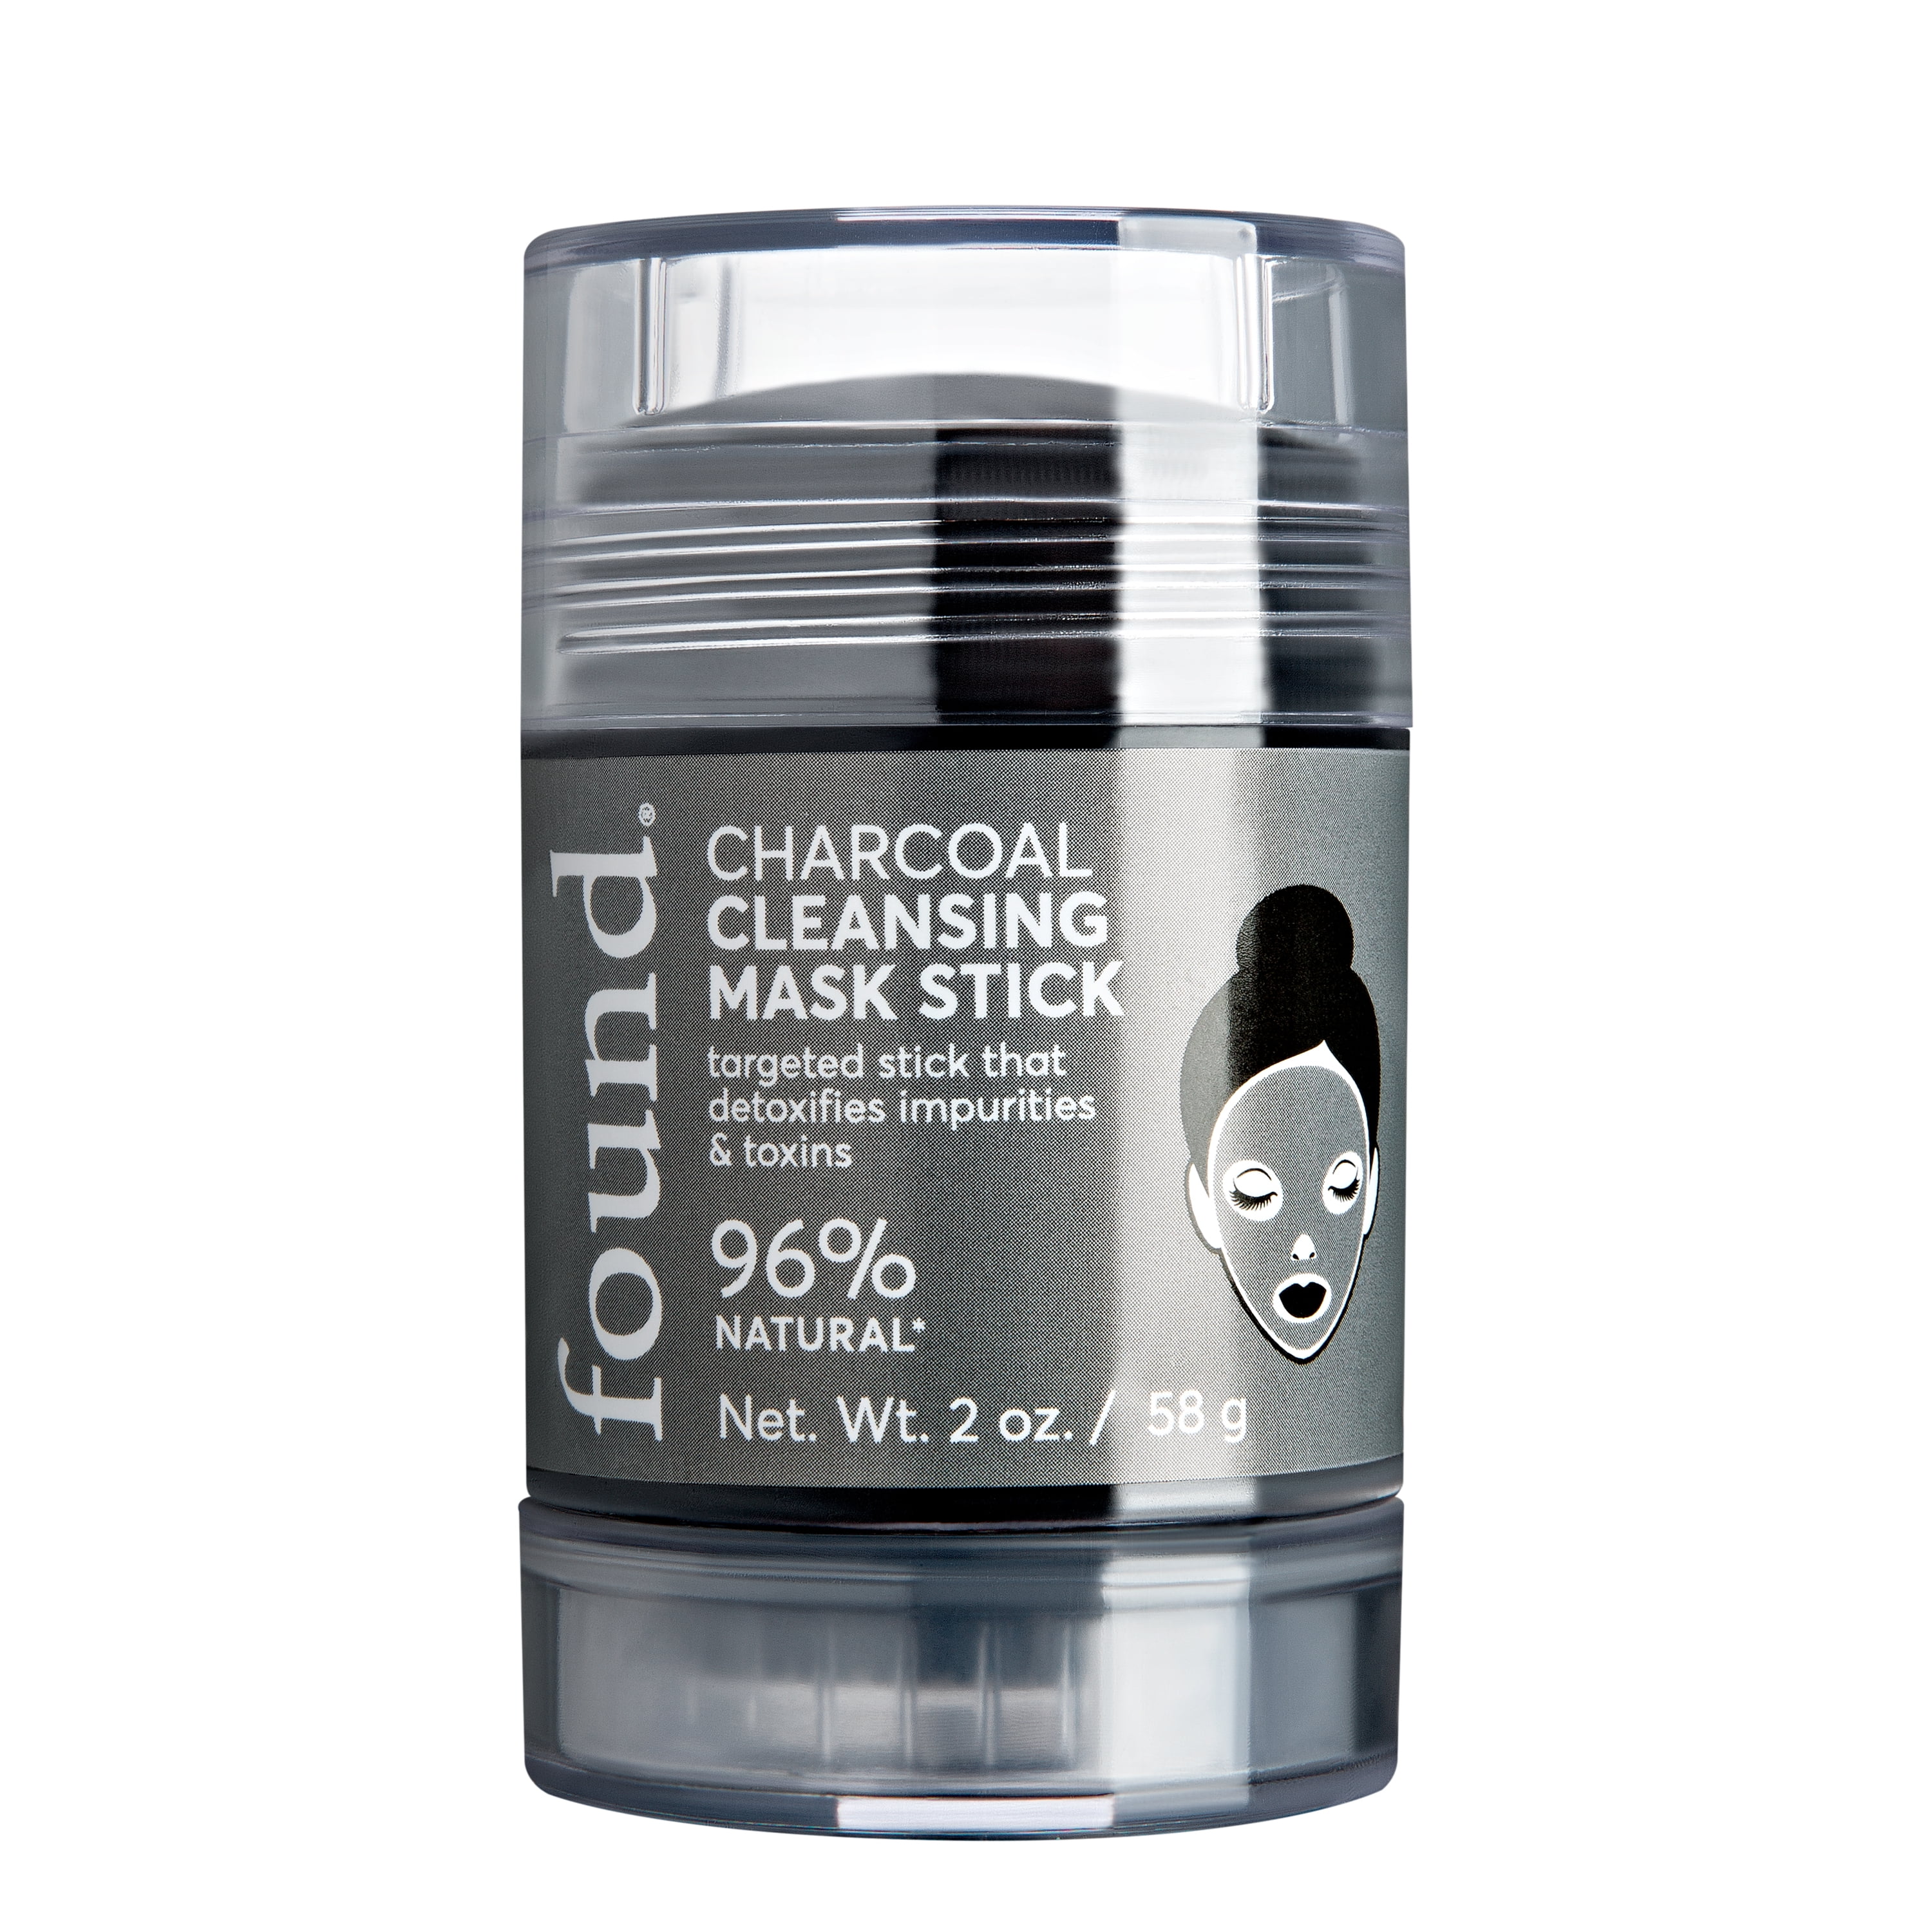 found Charcoal Cleansing 96% Mask oz Stick Natural, 2